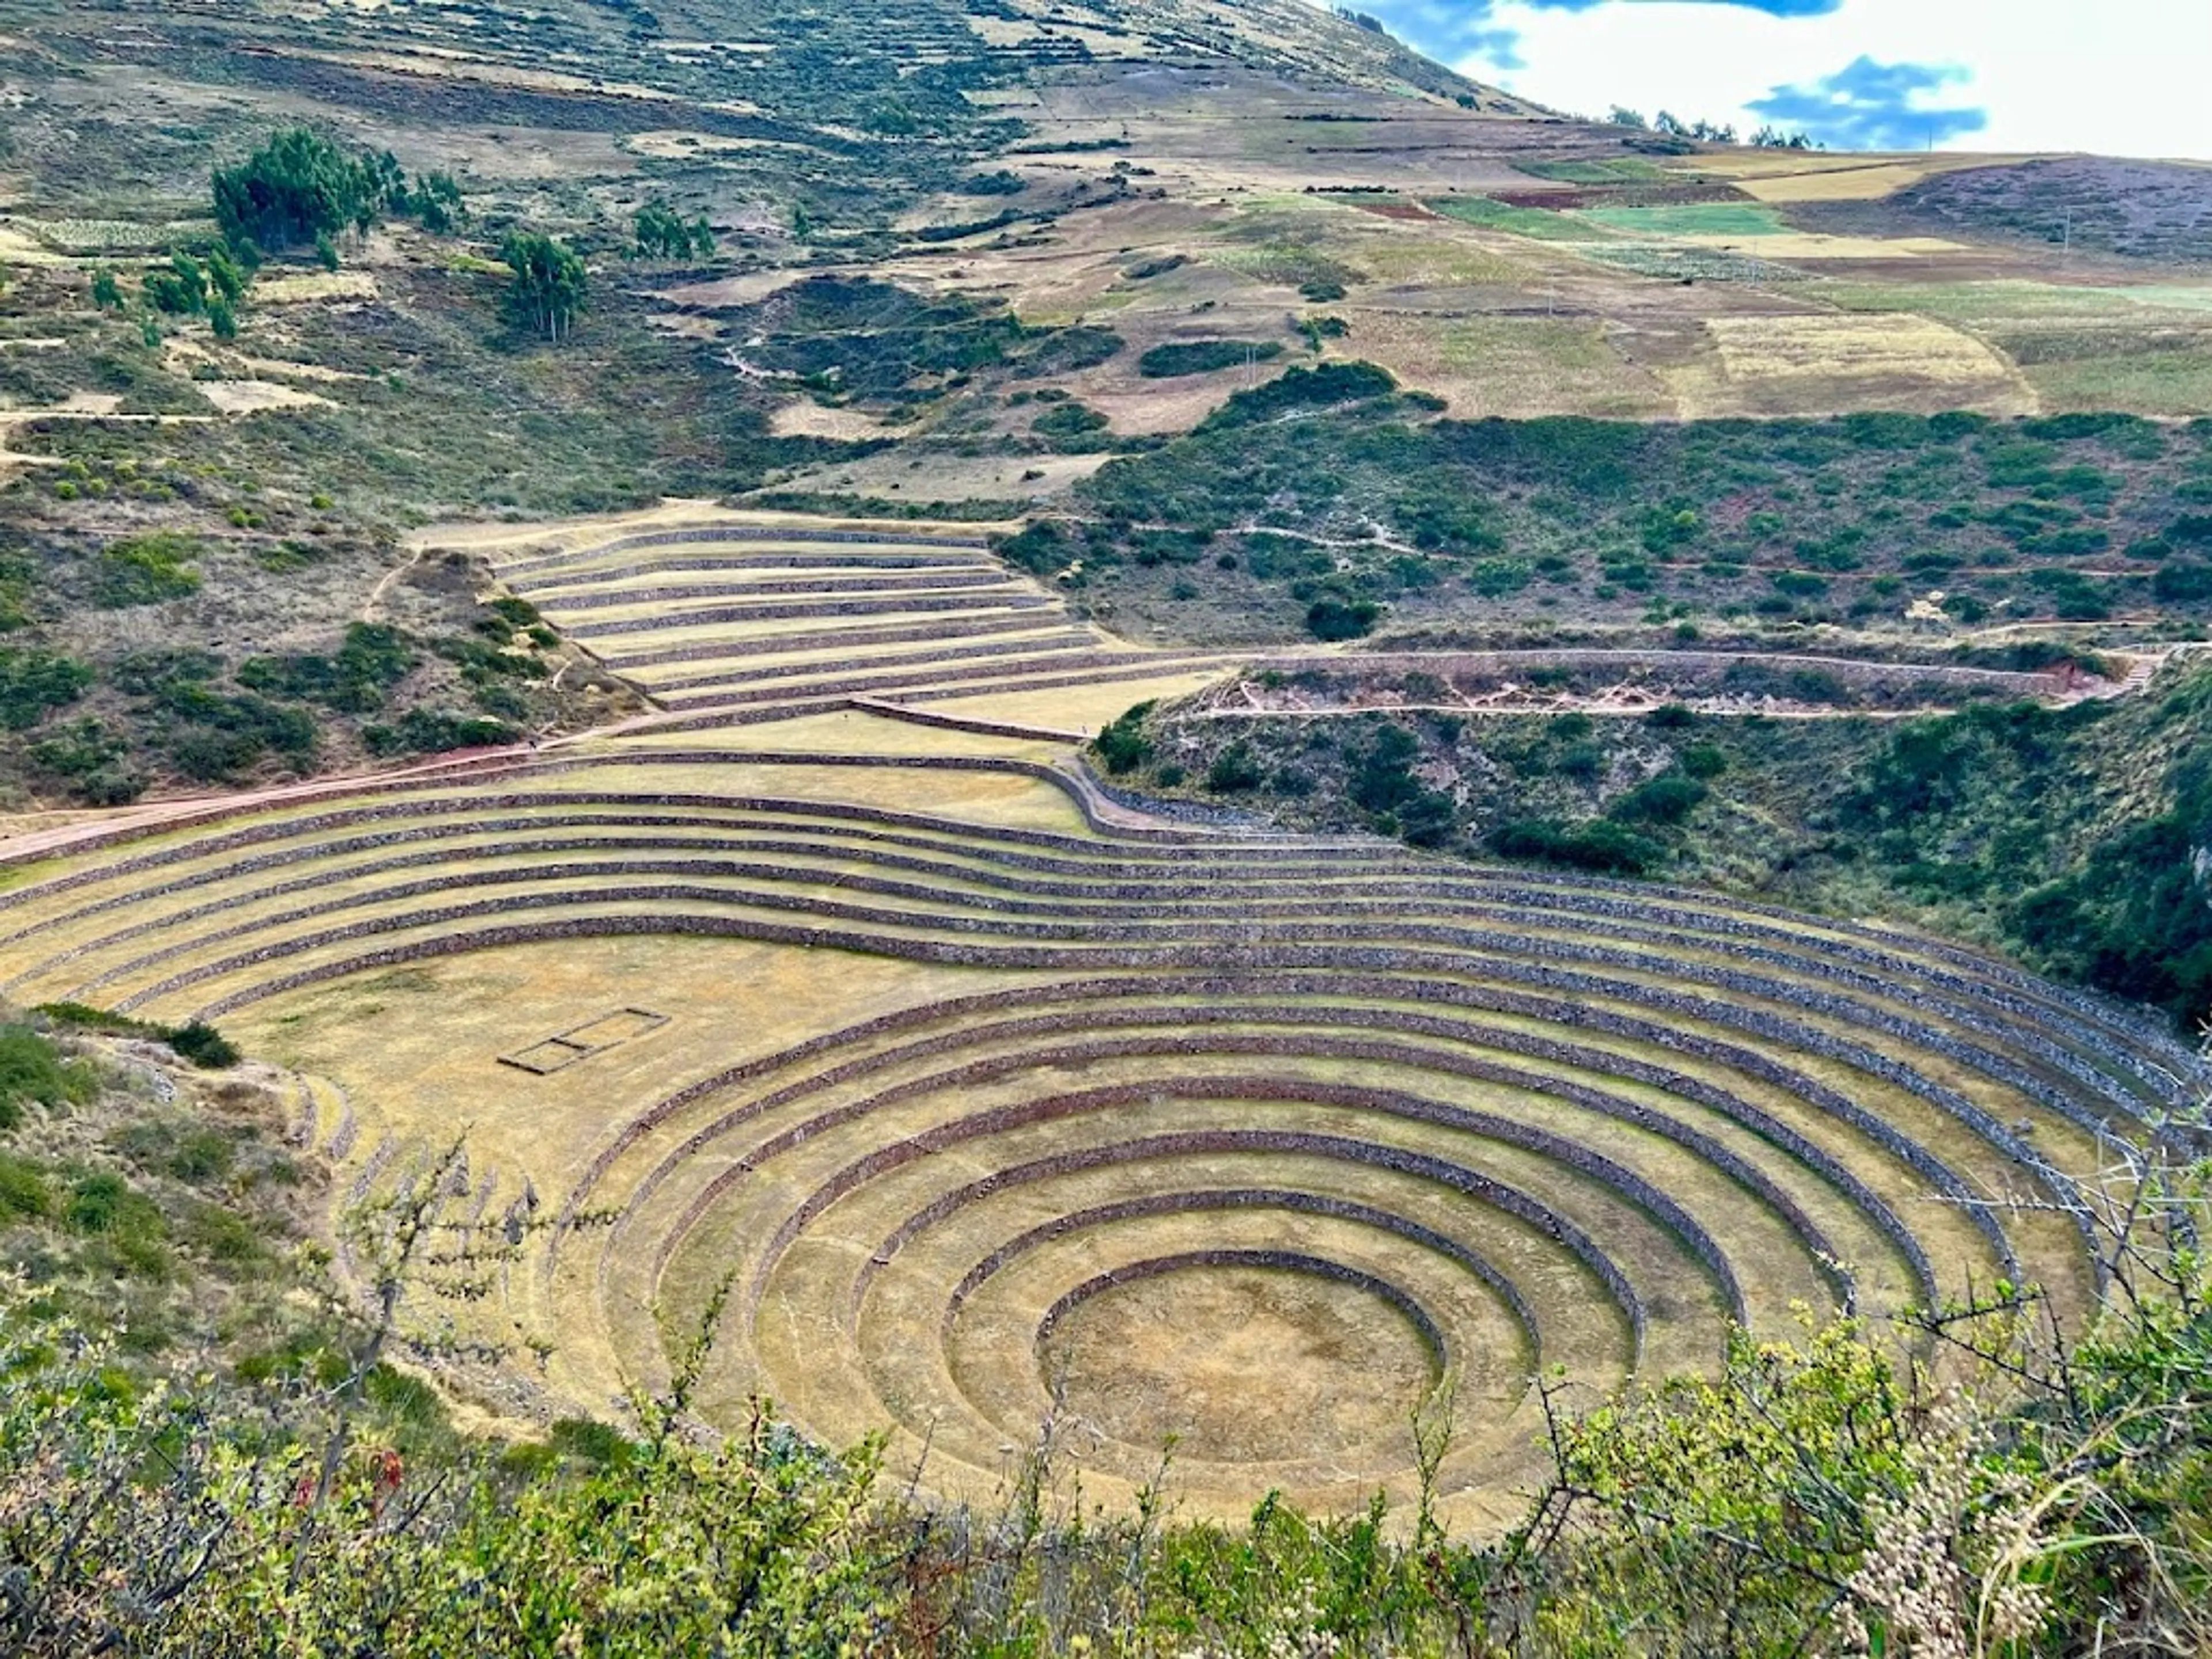 Moray agricultural terraces